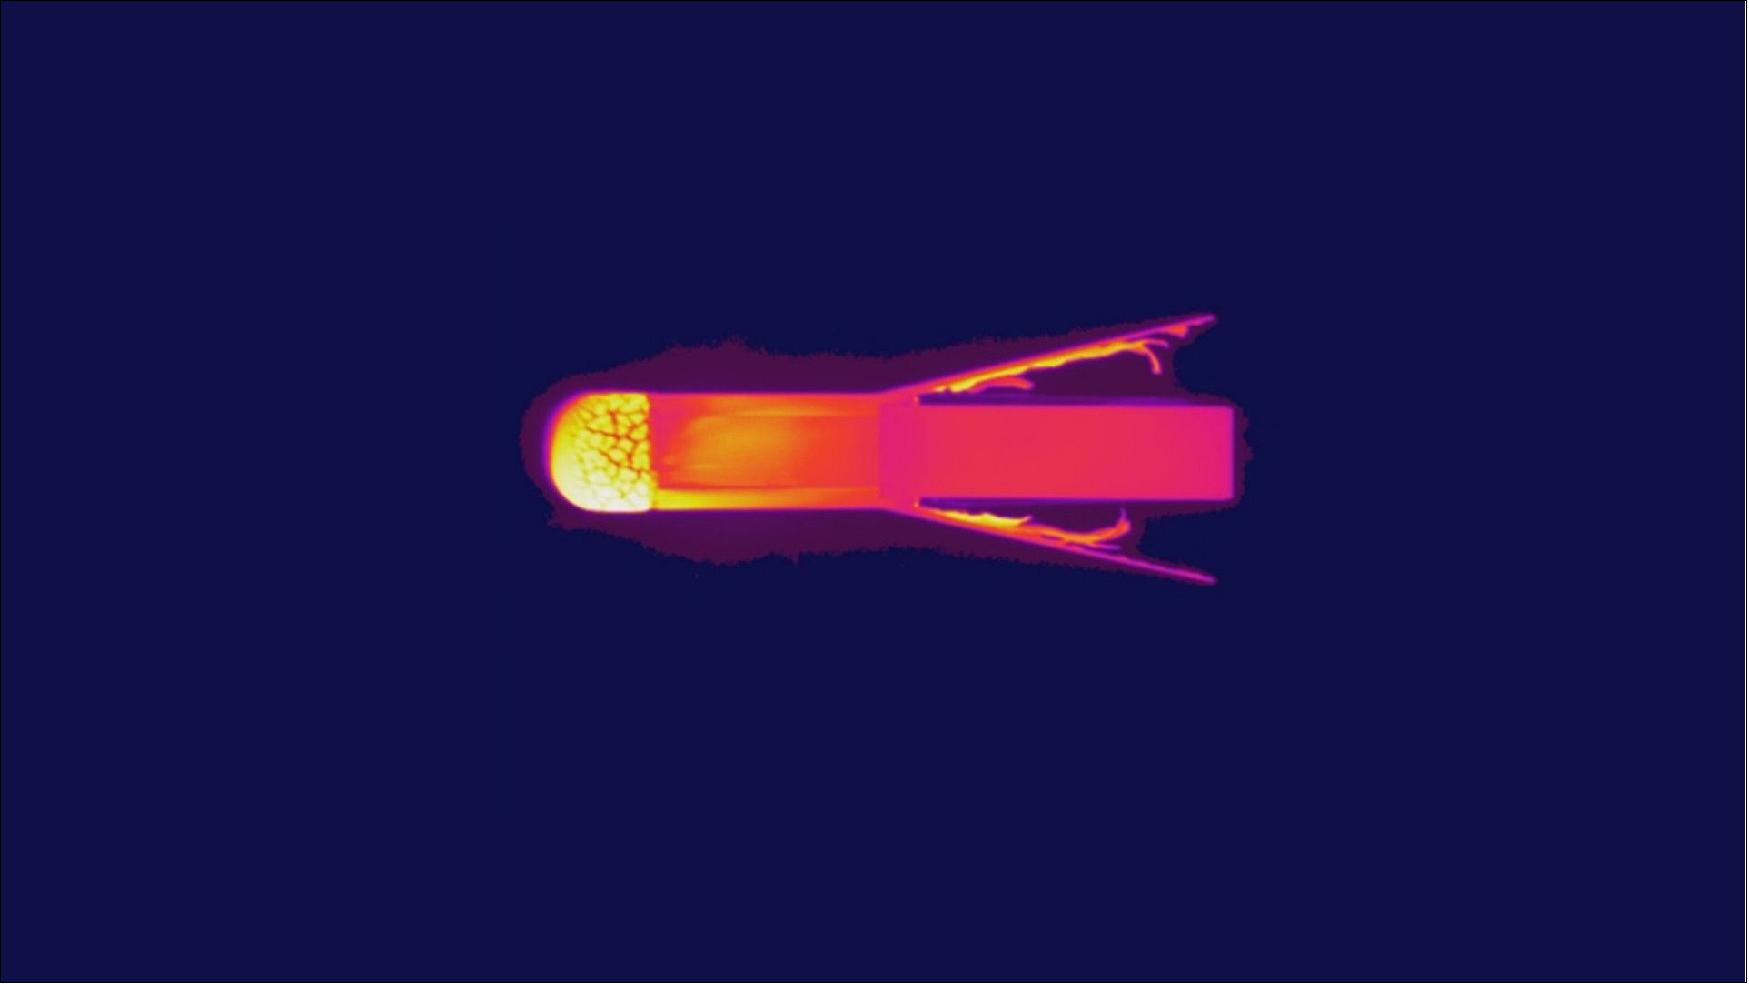 Figure 7: ESA's next CubeSat mission seen enduring the scorching heat of simulated atmospheric reentry inside the world's largest plasma wind tunnel [image credit: CIRA (Centro Italiano Ricerche Aerospaziali)]